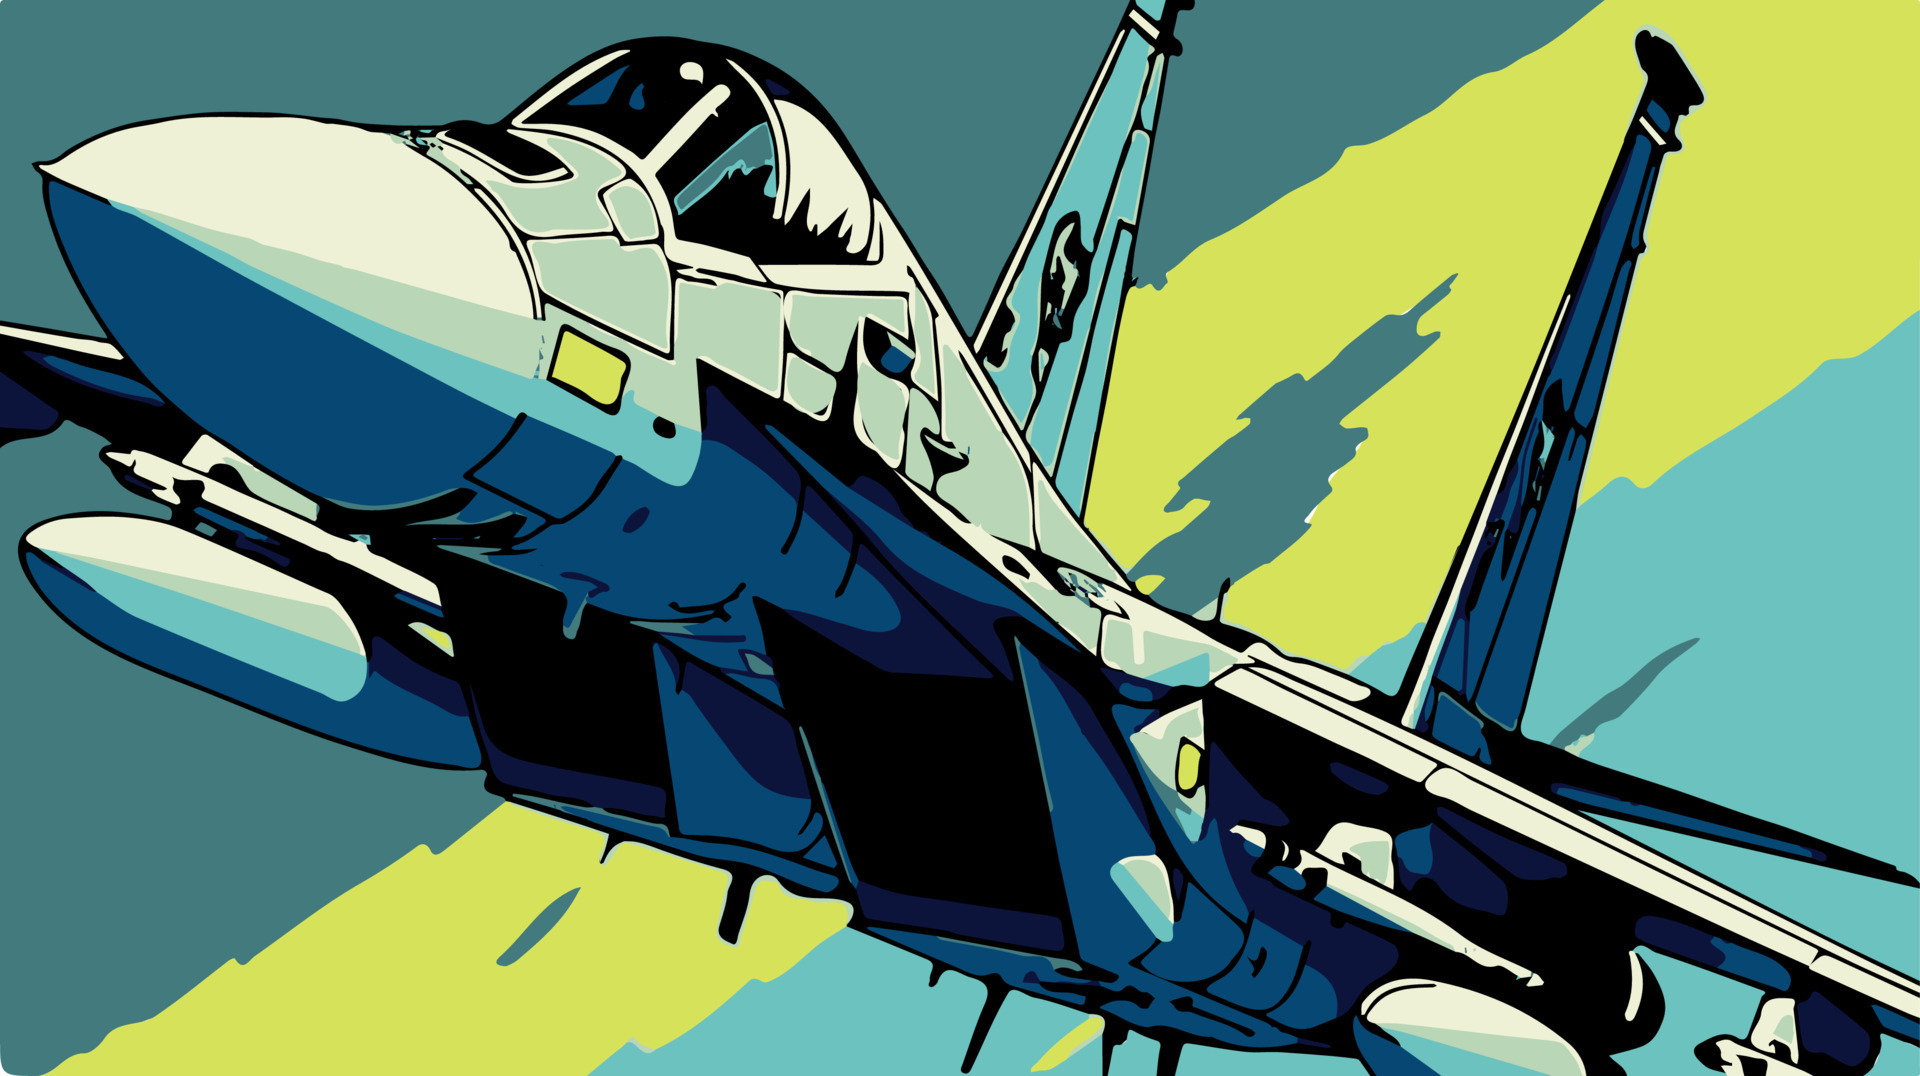 Amazon.com: Military Aircraft Fighter Poster F14 Tomcat Anime Genre P2  Print on Canvas Painting Wall Art for Living Room Home Decor Boy Gift  20x30inch(50x75cm): Posters & Prints